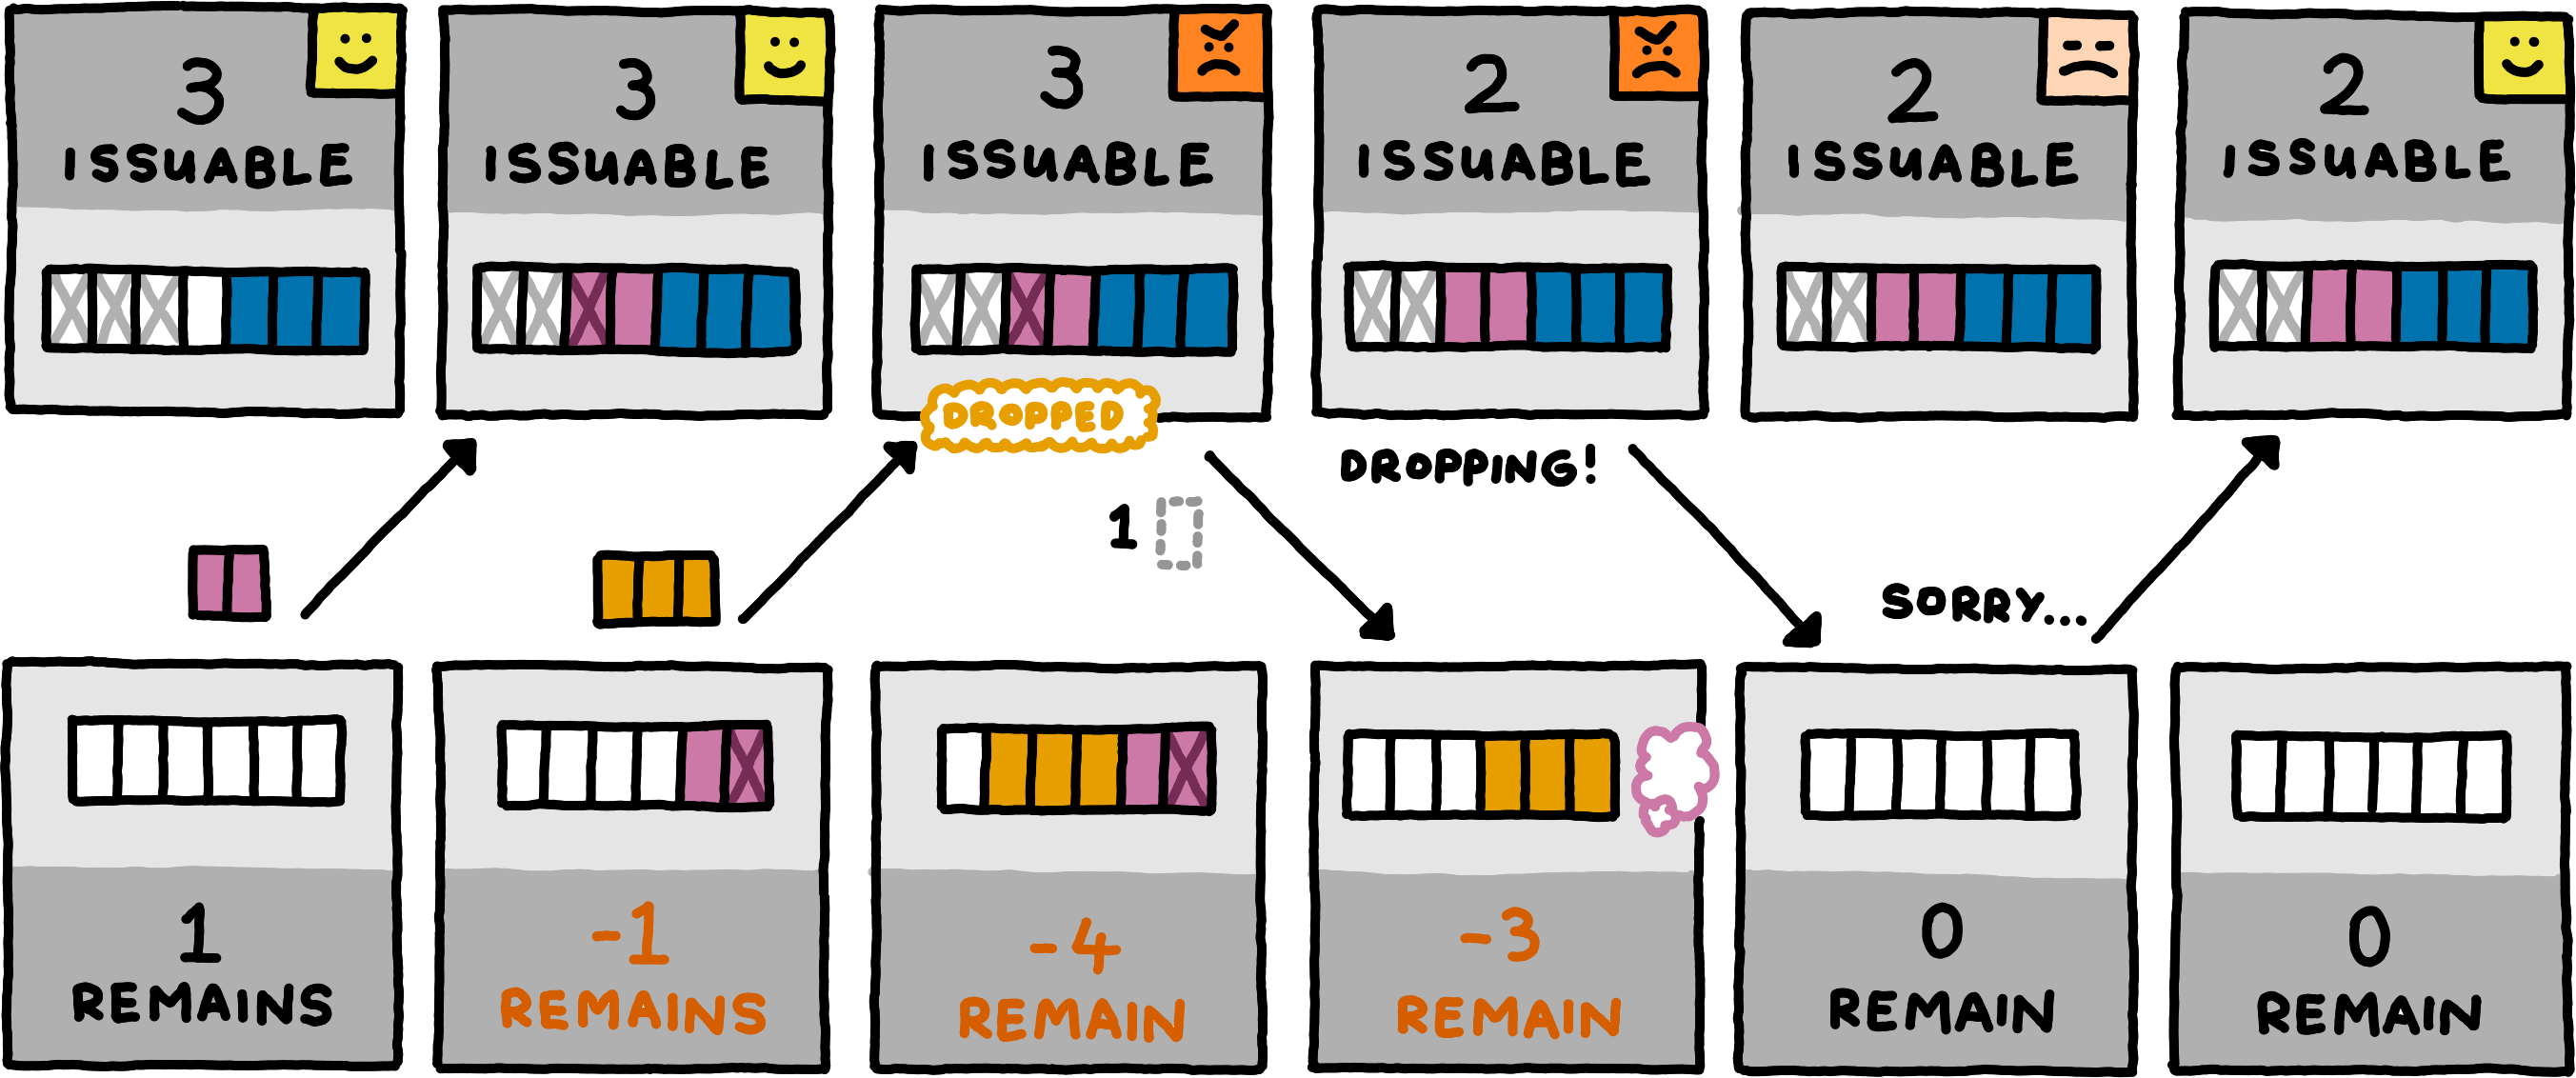 An extra-wide server-client diagram. The server starts with a happy expression, and a buffer containing four empty slots and one message of size three. The issuable guarantees are three, the client’s remaining guarantees are one. In this diagram, the client also maintains a buffer, initially consisting of six unused slots. In the first step, the client optimistically sends a message of two bytes, putting it at negative one remaining guarantees. The client places the message in its buffer, and tracks that only one byte of the message was optimistic. The server buffers the message, staying happy and remaining with three unissued guarantees. Its buffer now contains two free slots, a message of size two, and a message of size three. Next, the client sends a message of size three, placing a copy in its buffer, and putting it at negative four guarantees. The server has to drop this message, turning angry but otherwise keeping its state. Then, the server issues a single guarantee, putting its issuable guarantees at two. When the client receives this guarantee, it not only increases its remaining guarantees to negative three, but it also removes the two-byte message from its buffer, leaving the buffer with three unused slots and the three-byte message. Next, the server sends a notification that it dropped messages. The client empties its buffer of the three-byte message, and increases its remaining guarantees by that amount back to zero. It then replies with an apology, turning the server happy again. In this final state, the happy server has two issuable guarantees and a buffer containing two unused slots — the client’s message of size two, and the size-three message that occupied the buffer from the very beginning. The client ends the interaction with an empty buffer and zero remaining guarantees.